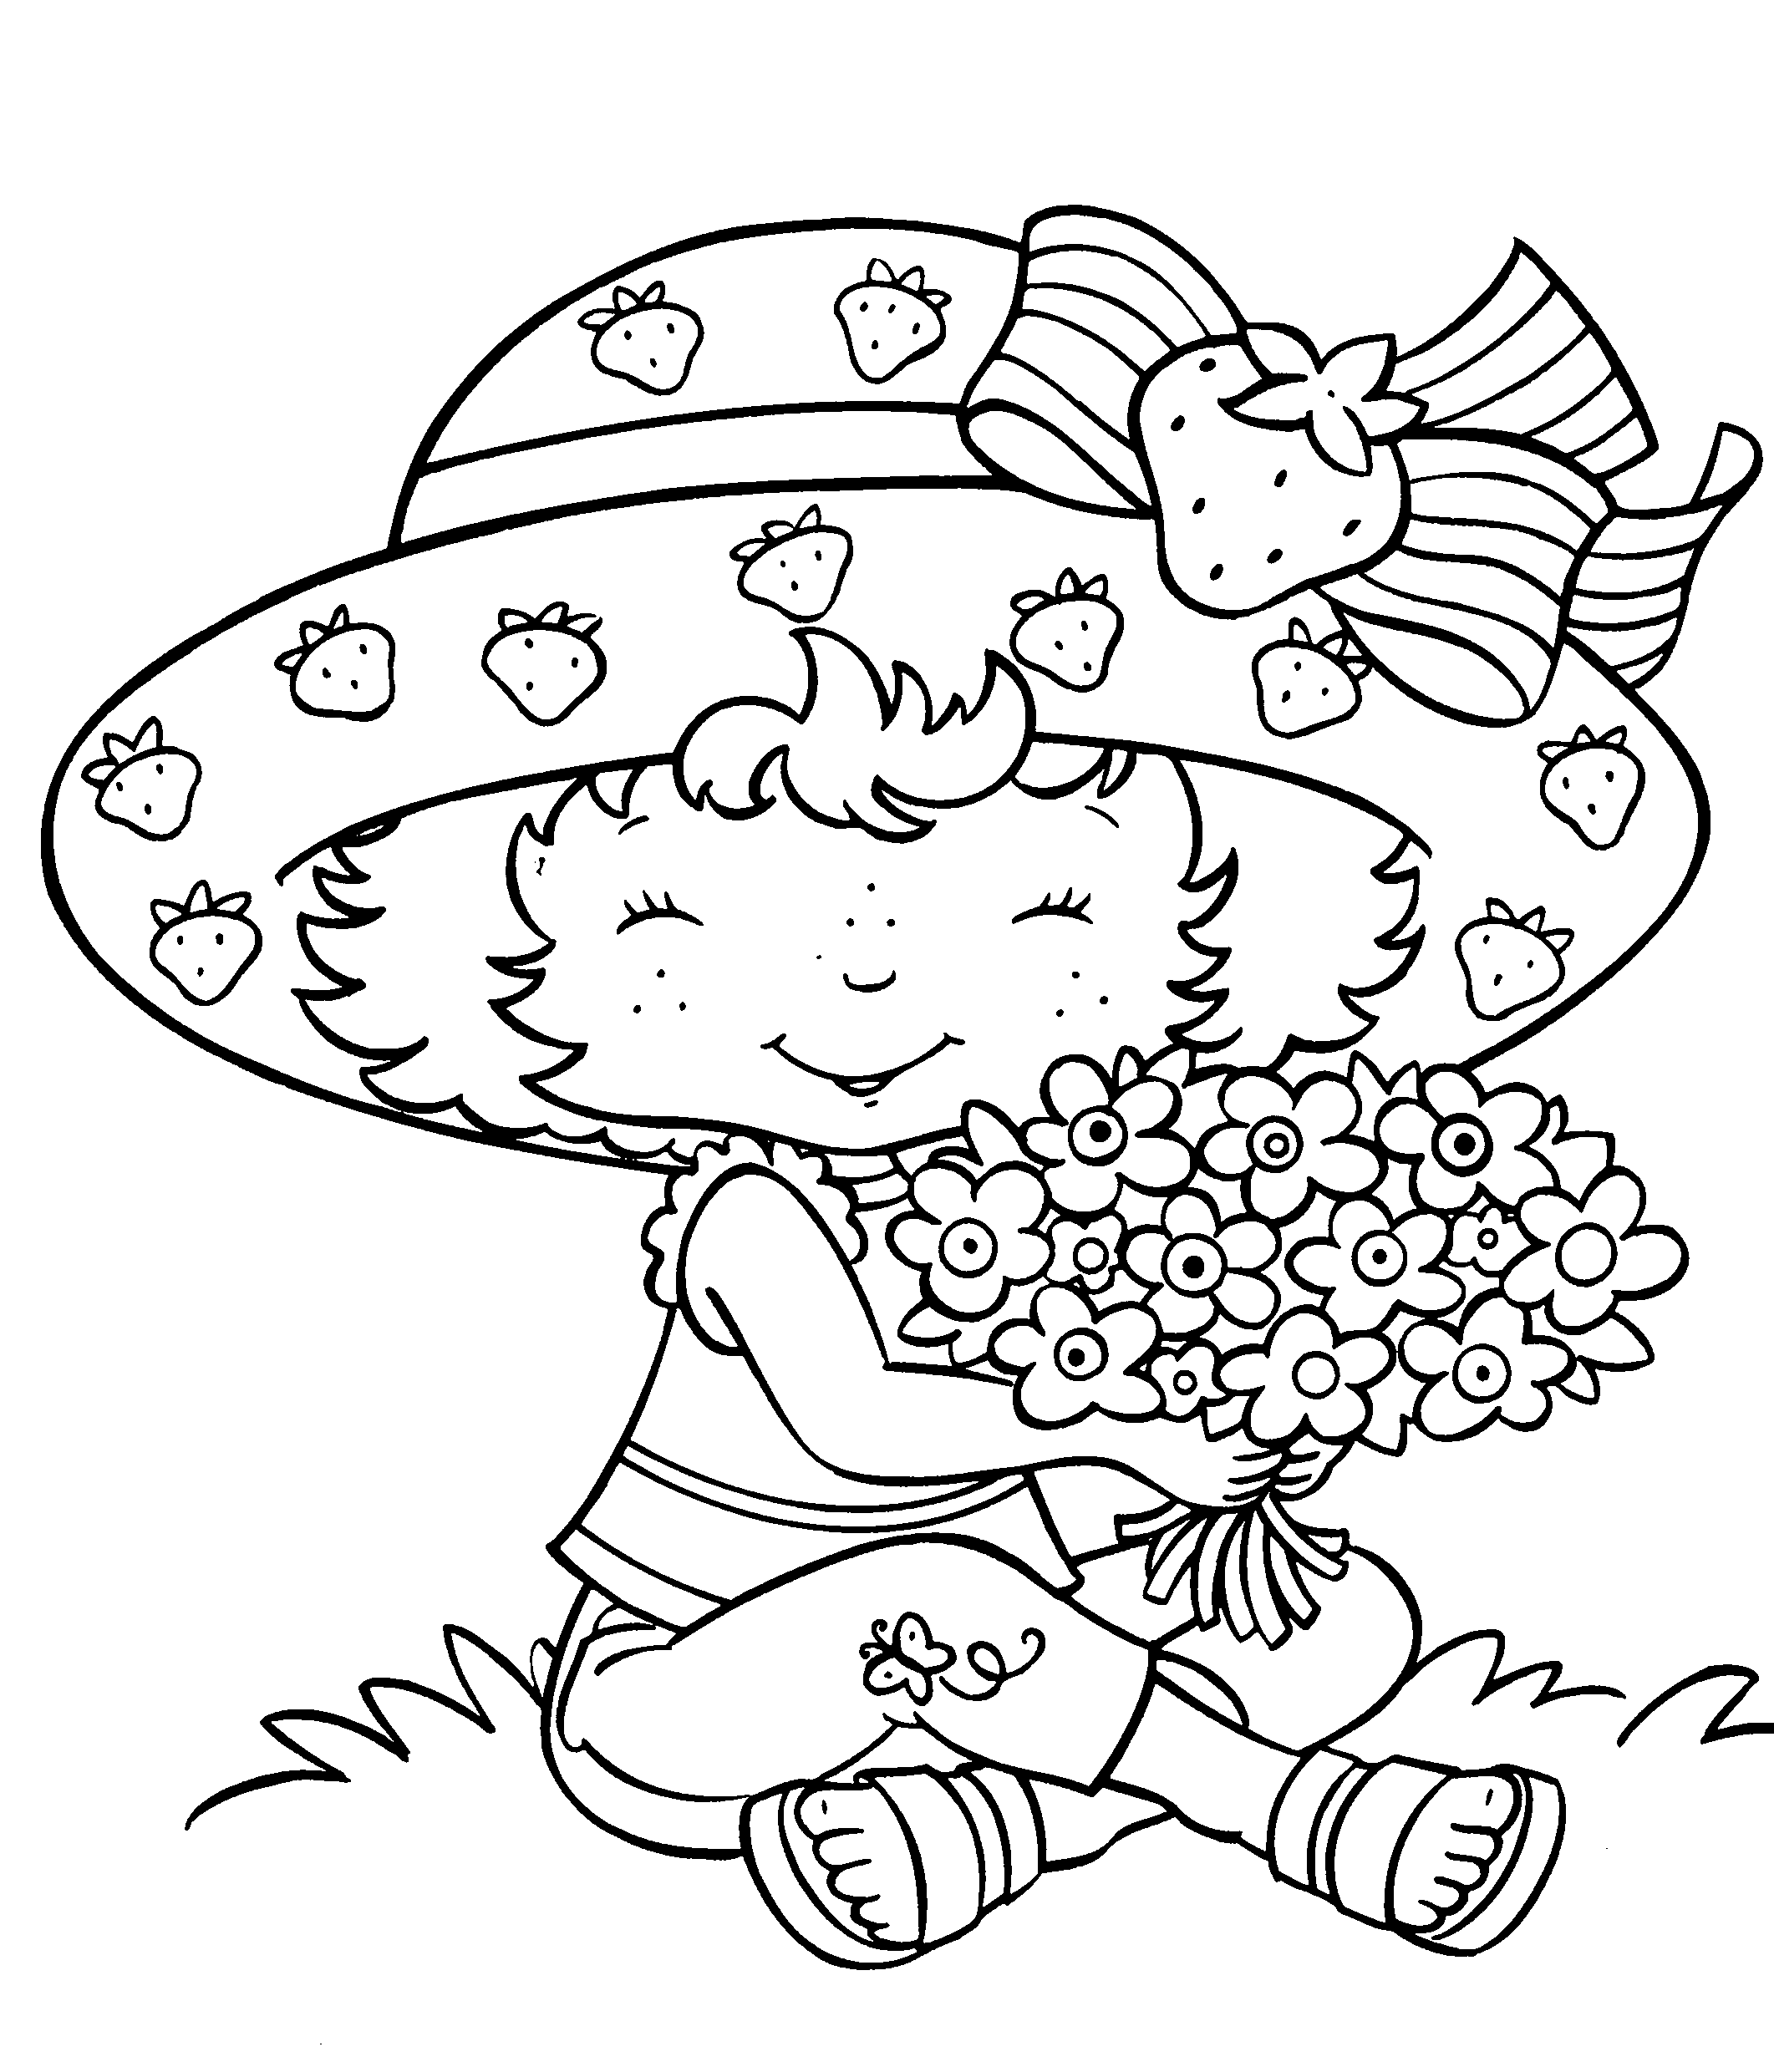  Strawberry Shortcake Coloring Pages / Cool coloring pages / 2